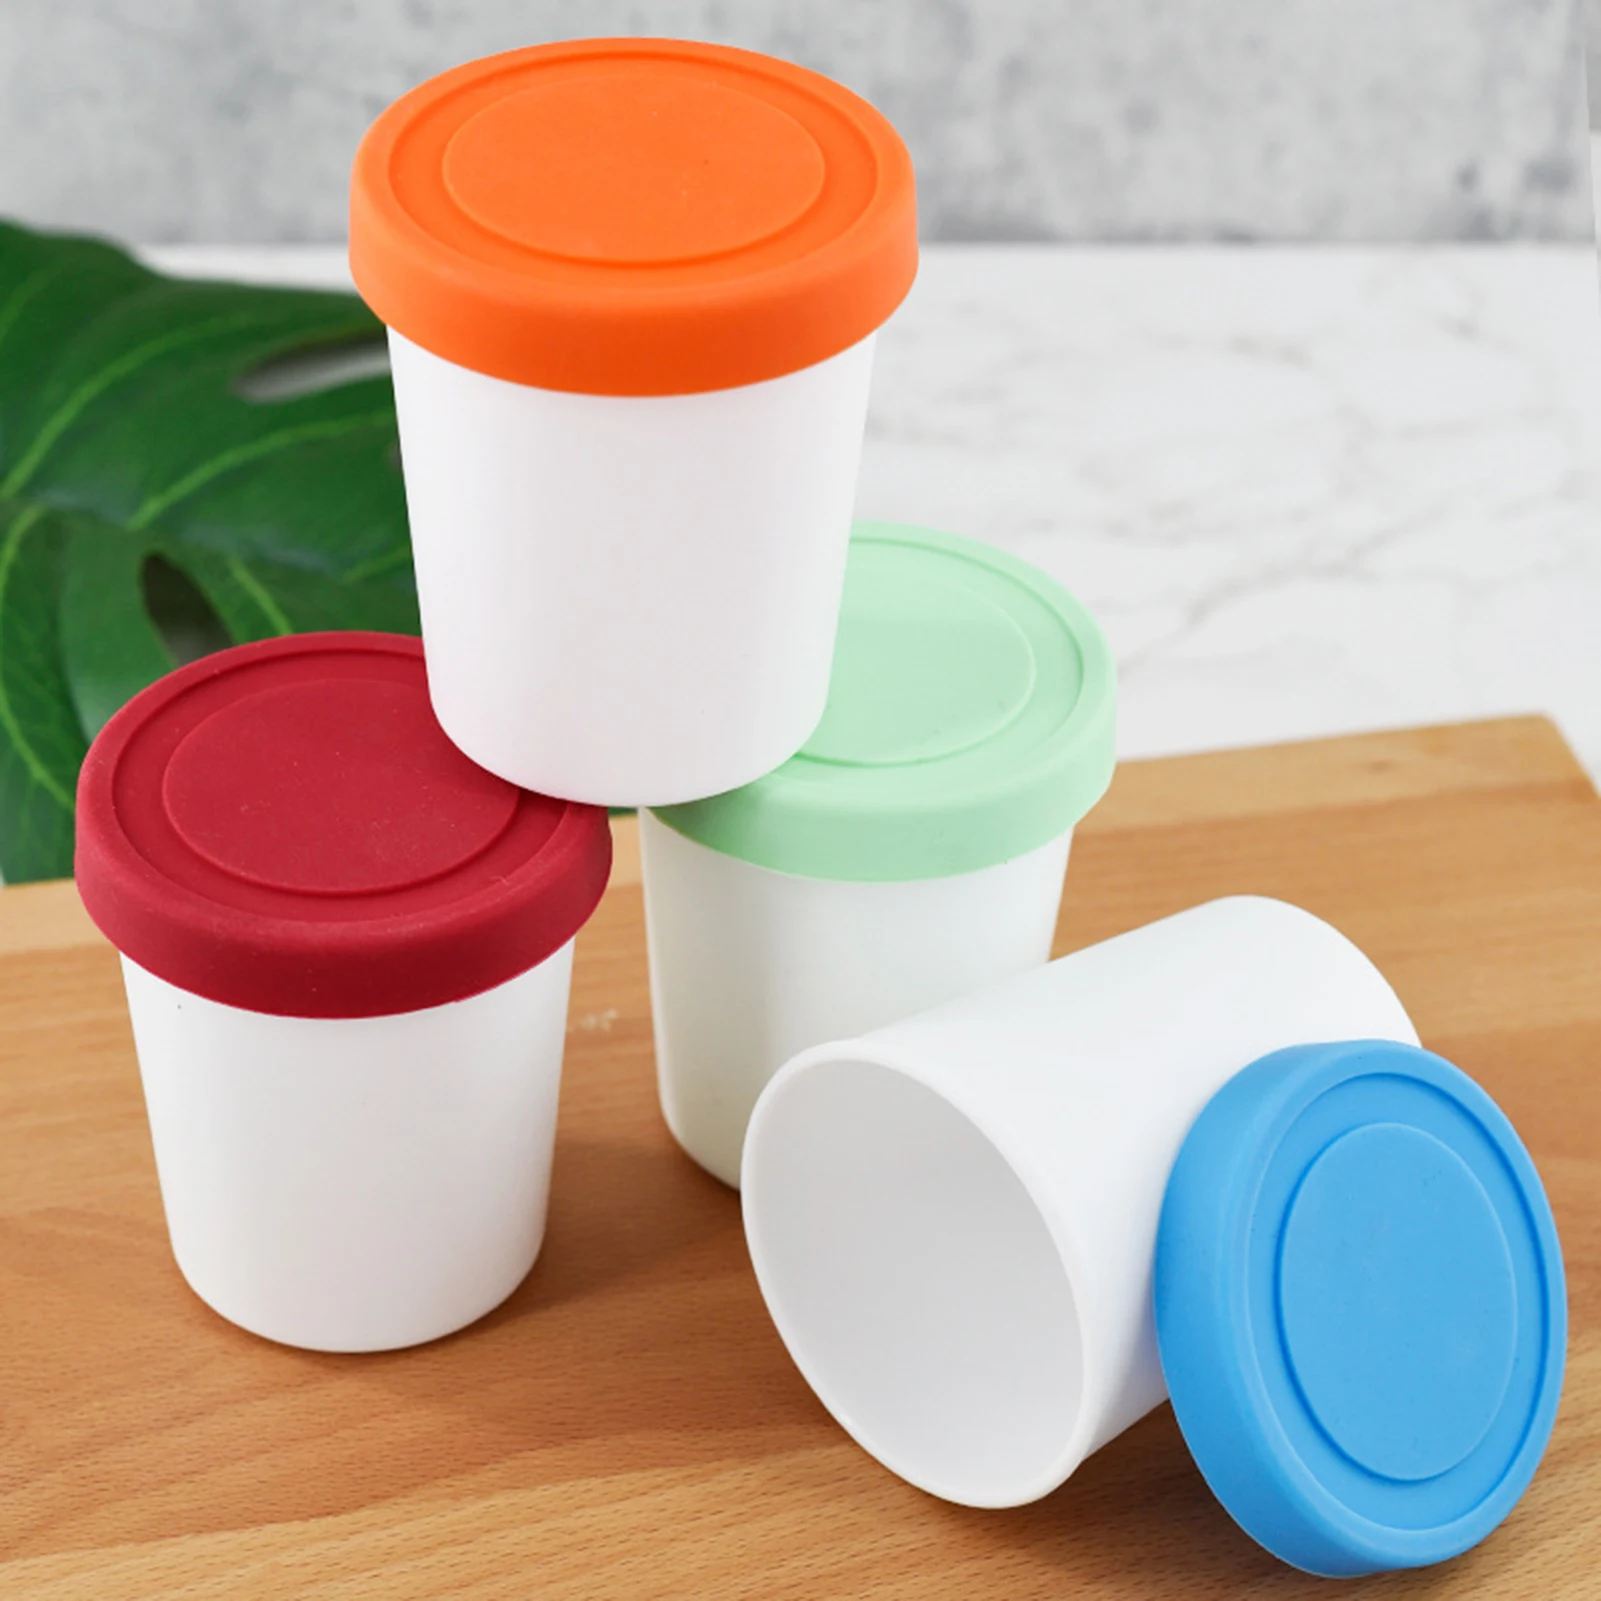 https://ae01.alicdn.com/kf/Se45cc7065d6d432e9eb57f0351e947d7Y/Ice-Cream-Cups-Container-Dessert-Freezer-Storage-Cup-Tub-Lid-Containers-Plastic-Round-Tubs-Dessert-Food.jpg